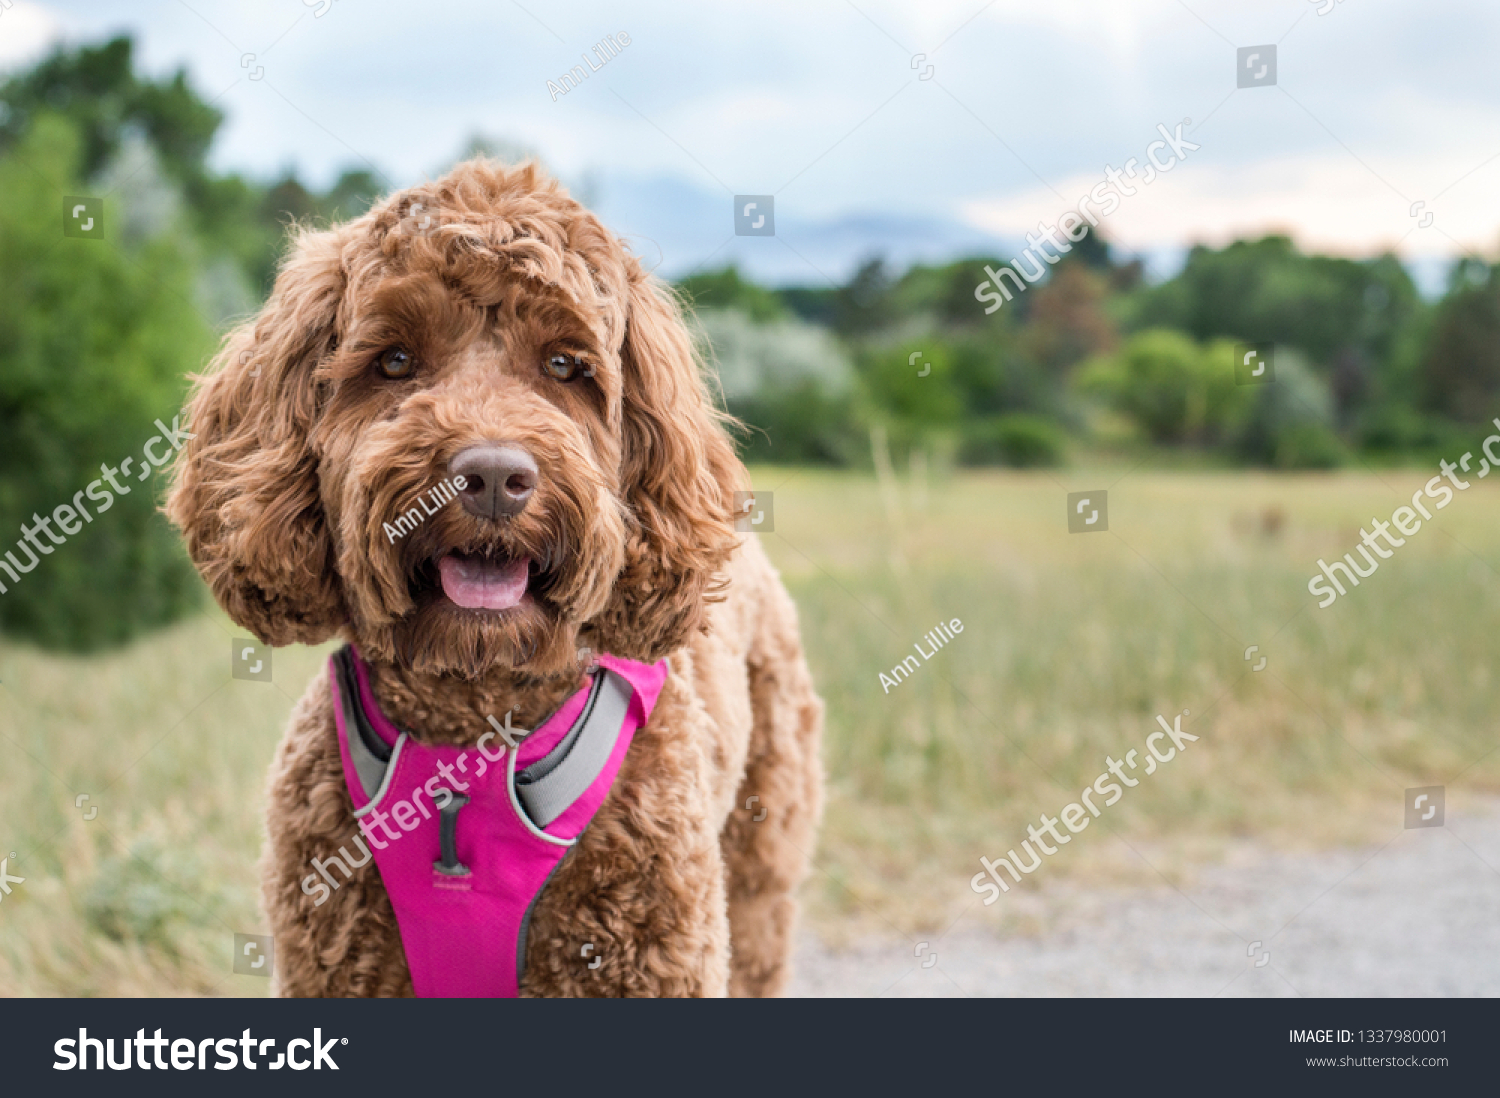 A happy mixed breed dog (a labradoodle or goldendoodle) is smiling with her tongue out on a trail next to a field of green grasses and a forest of trees. She wears a bright pink harness for hiking. #1337980001